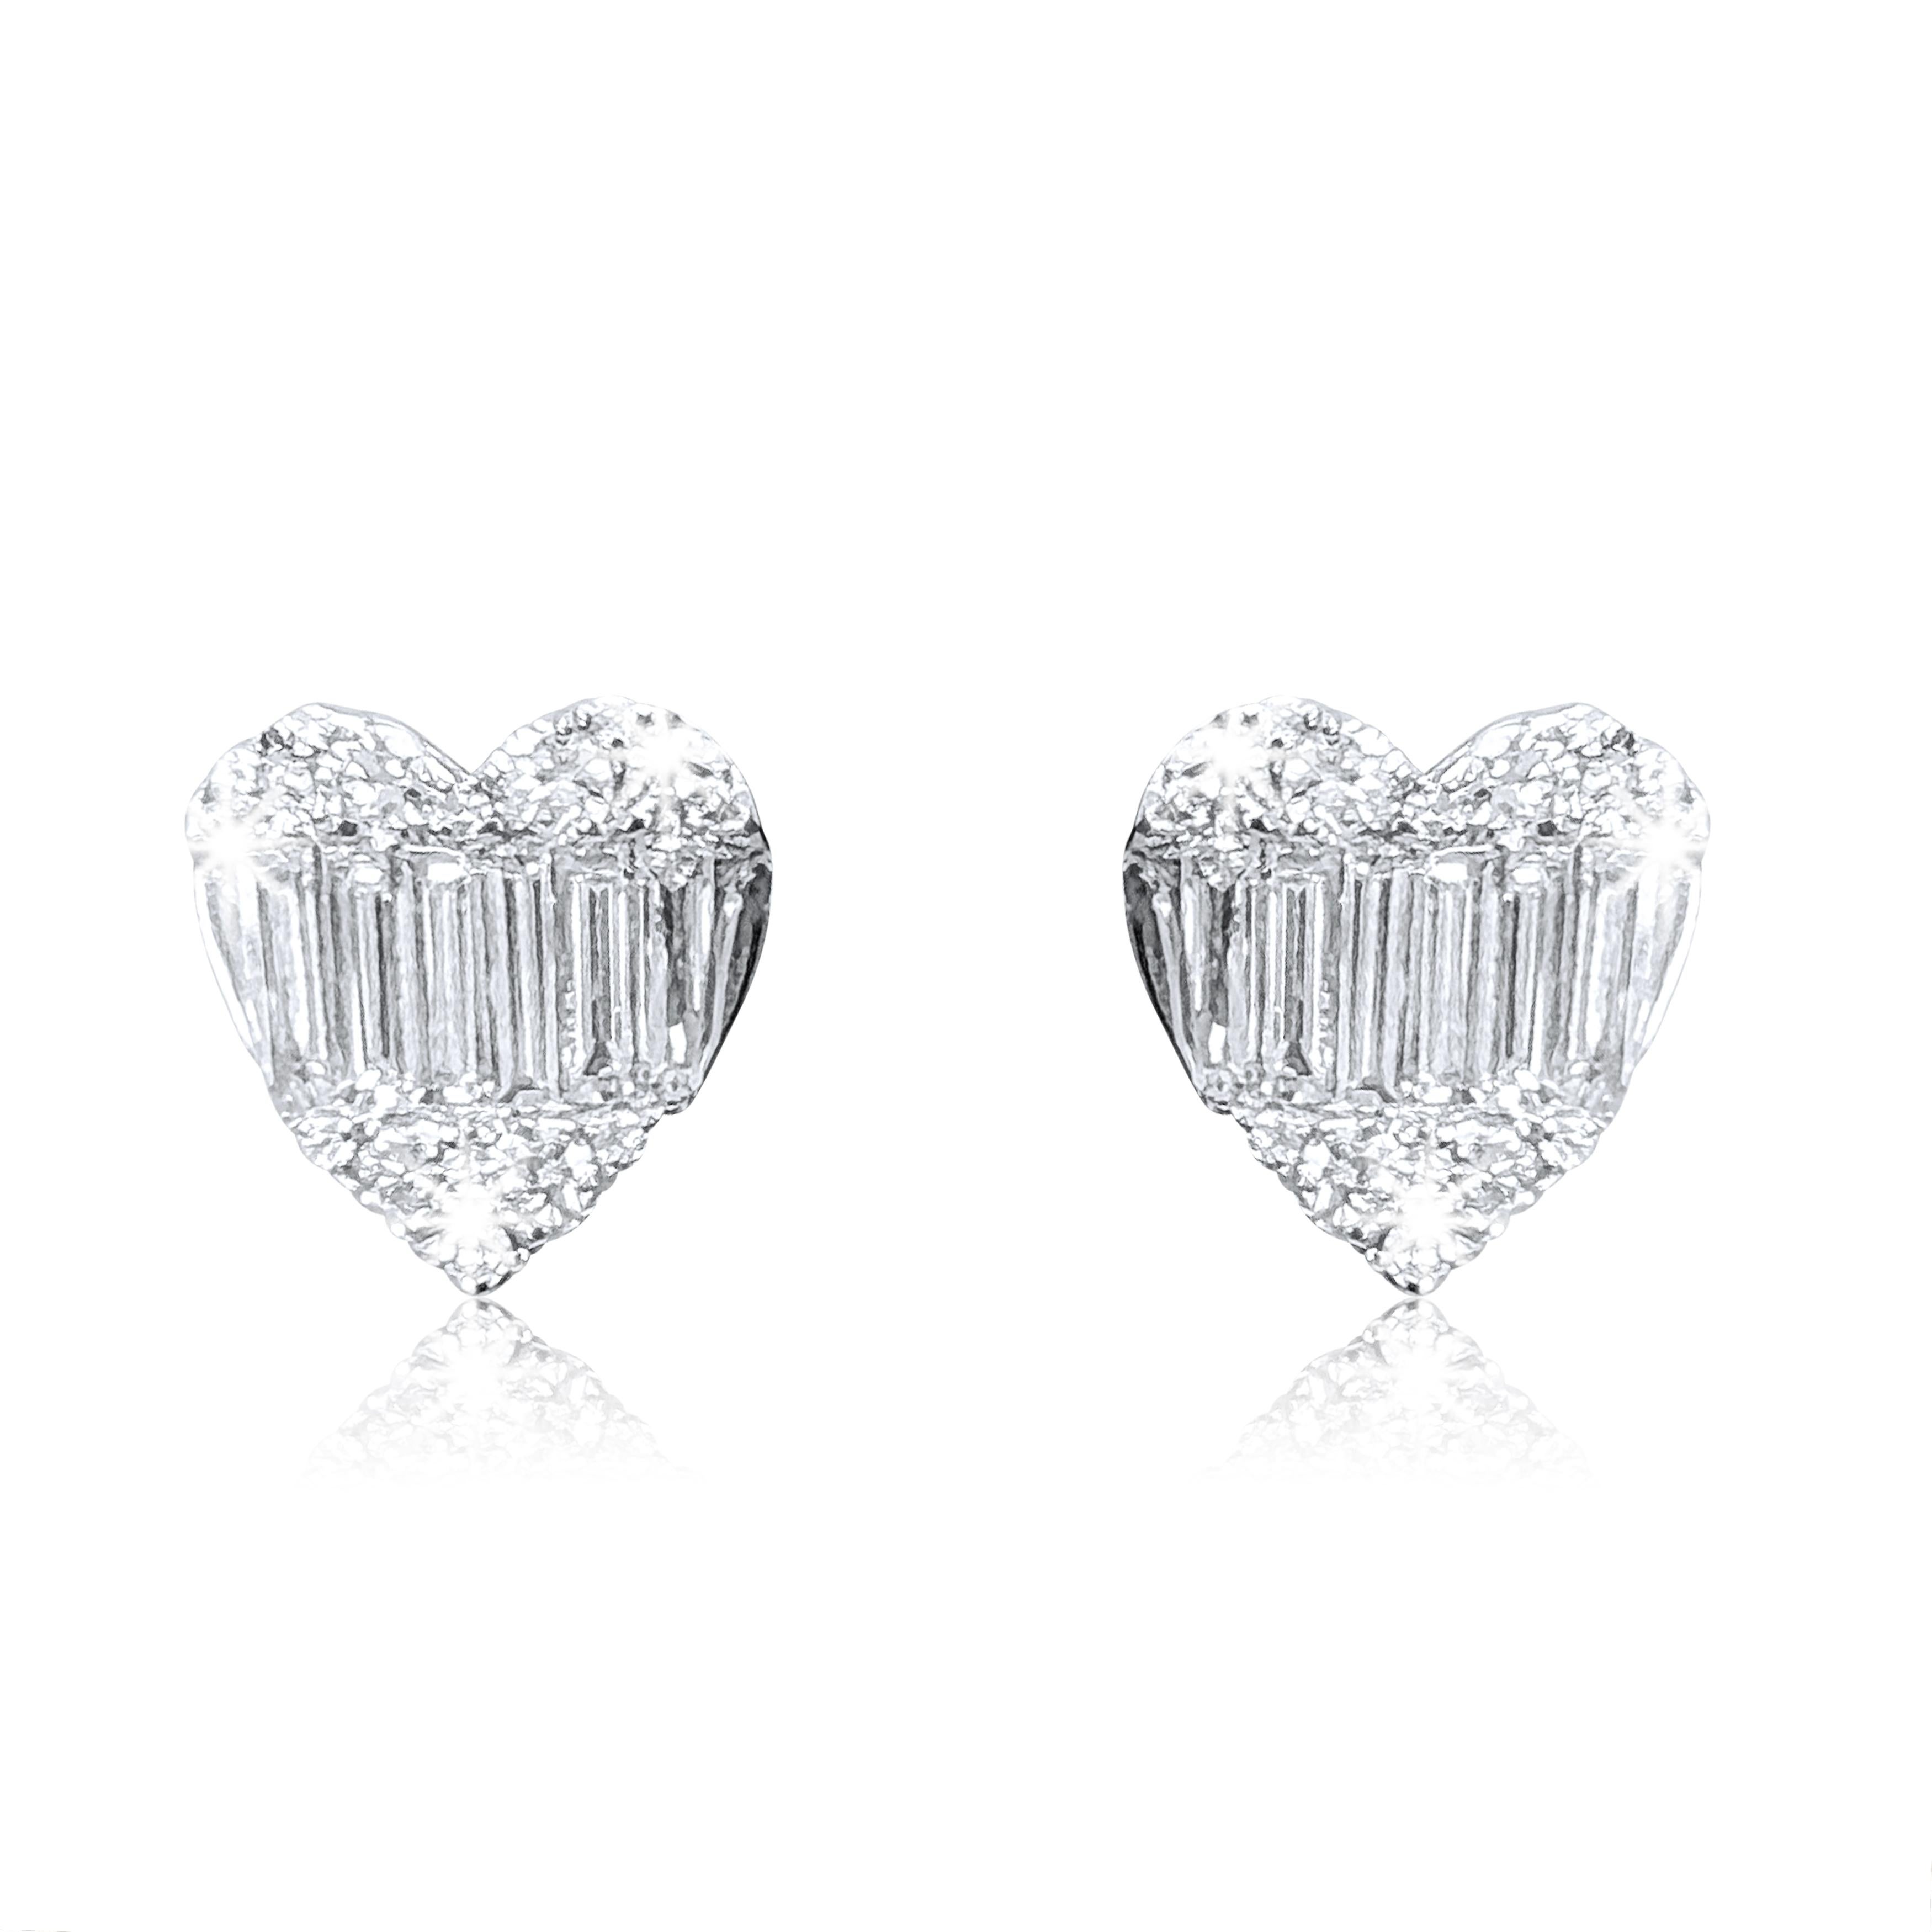 Earring Information

Metal Purity : 18K
Color : White Gold
Gold Weight : 4.42g
Diamond Count : 20 Round Diamonds
Round Diamond Carat Weight : 0.58 ttcw
Baguette Diamonds Count : 12
Baguette Diamonds Carat Weight : 0.77 ttcw
Serial #EA15476
